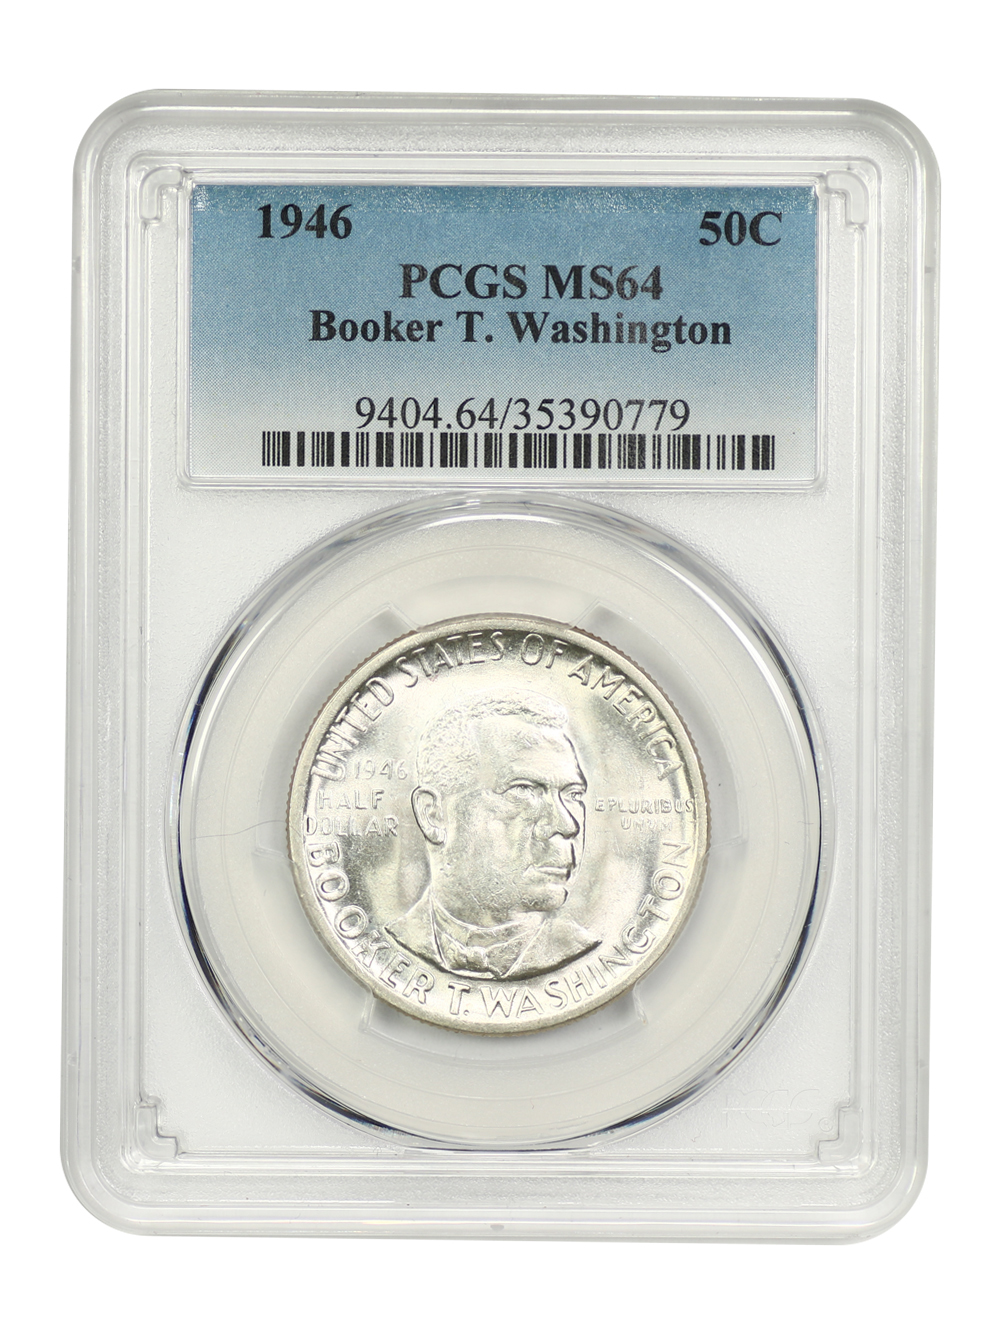 Primary image for 1946 50C Booker T. Washington PCGS MS64